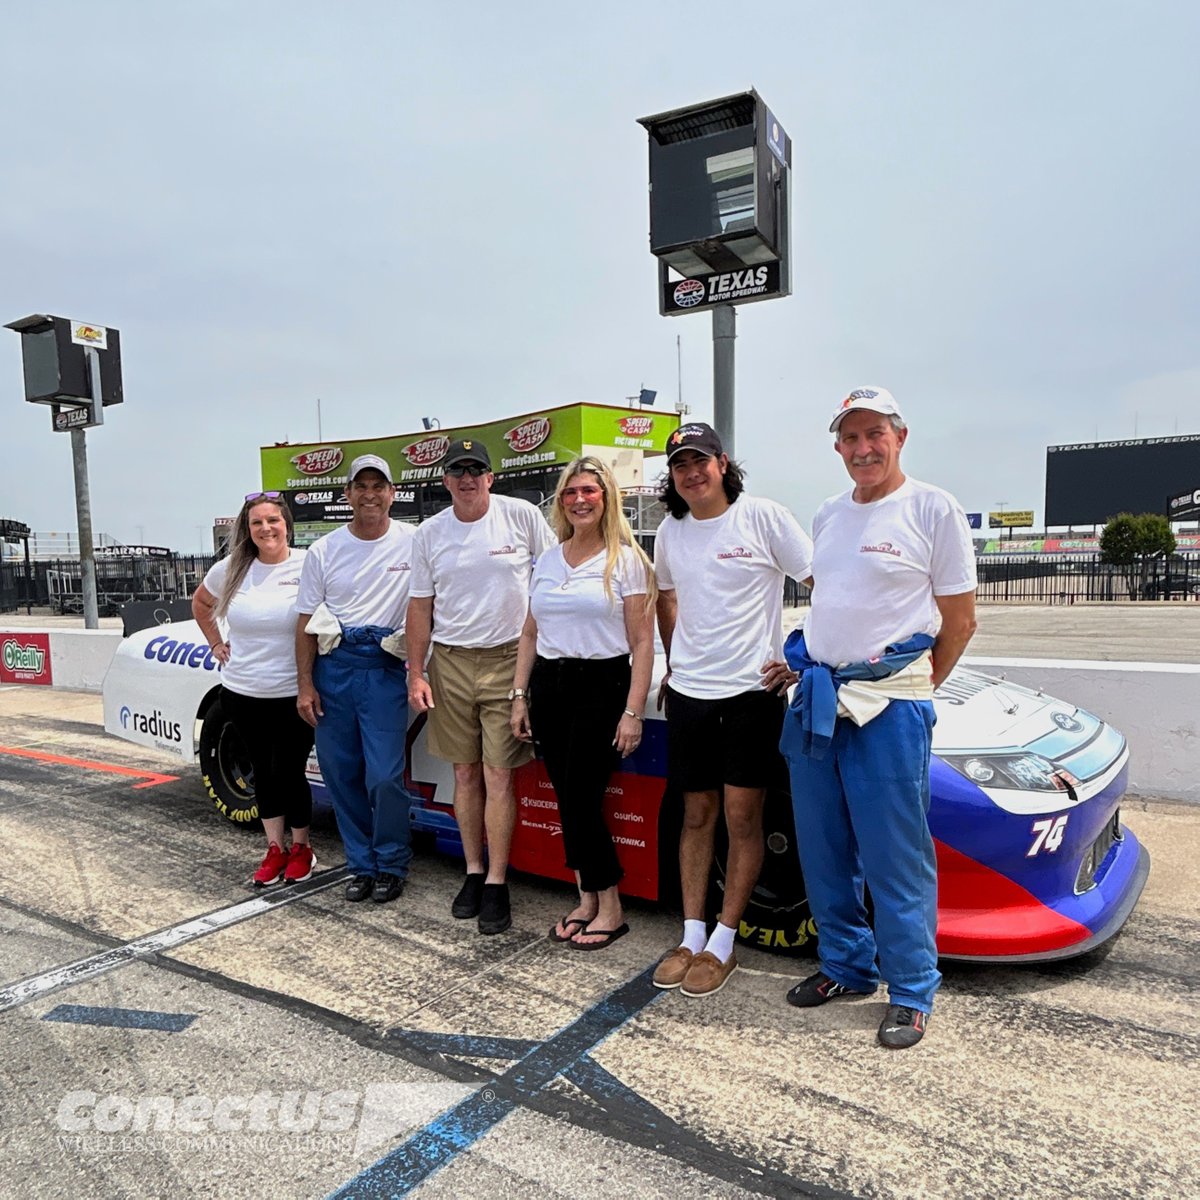 This year, ConectUS Wireless partnered with the Team Texas Racing School, and we’re happy to unveil their new logo that we collaborated with them on! We’re so thankful for this partnership and we can’t wait to see what the future holds. #weloveverizon #likeconectus #verizon